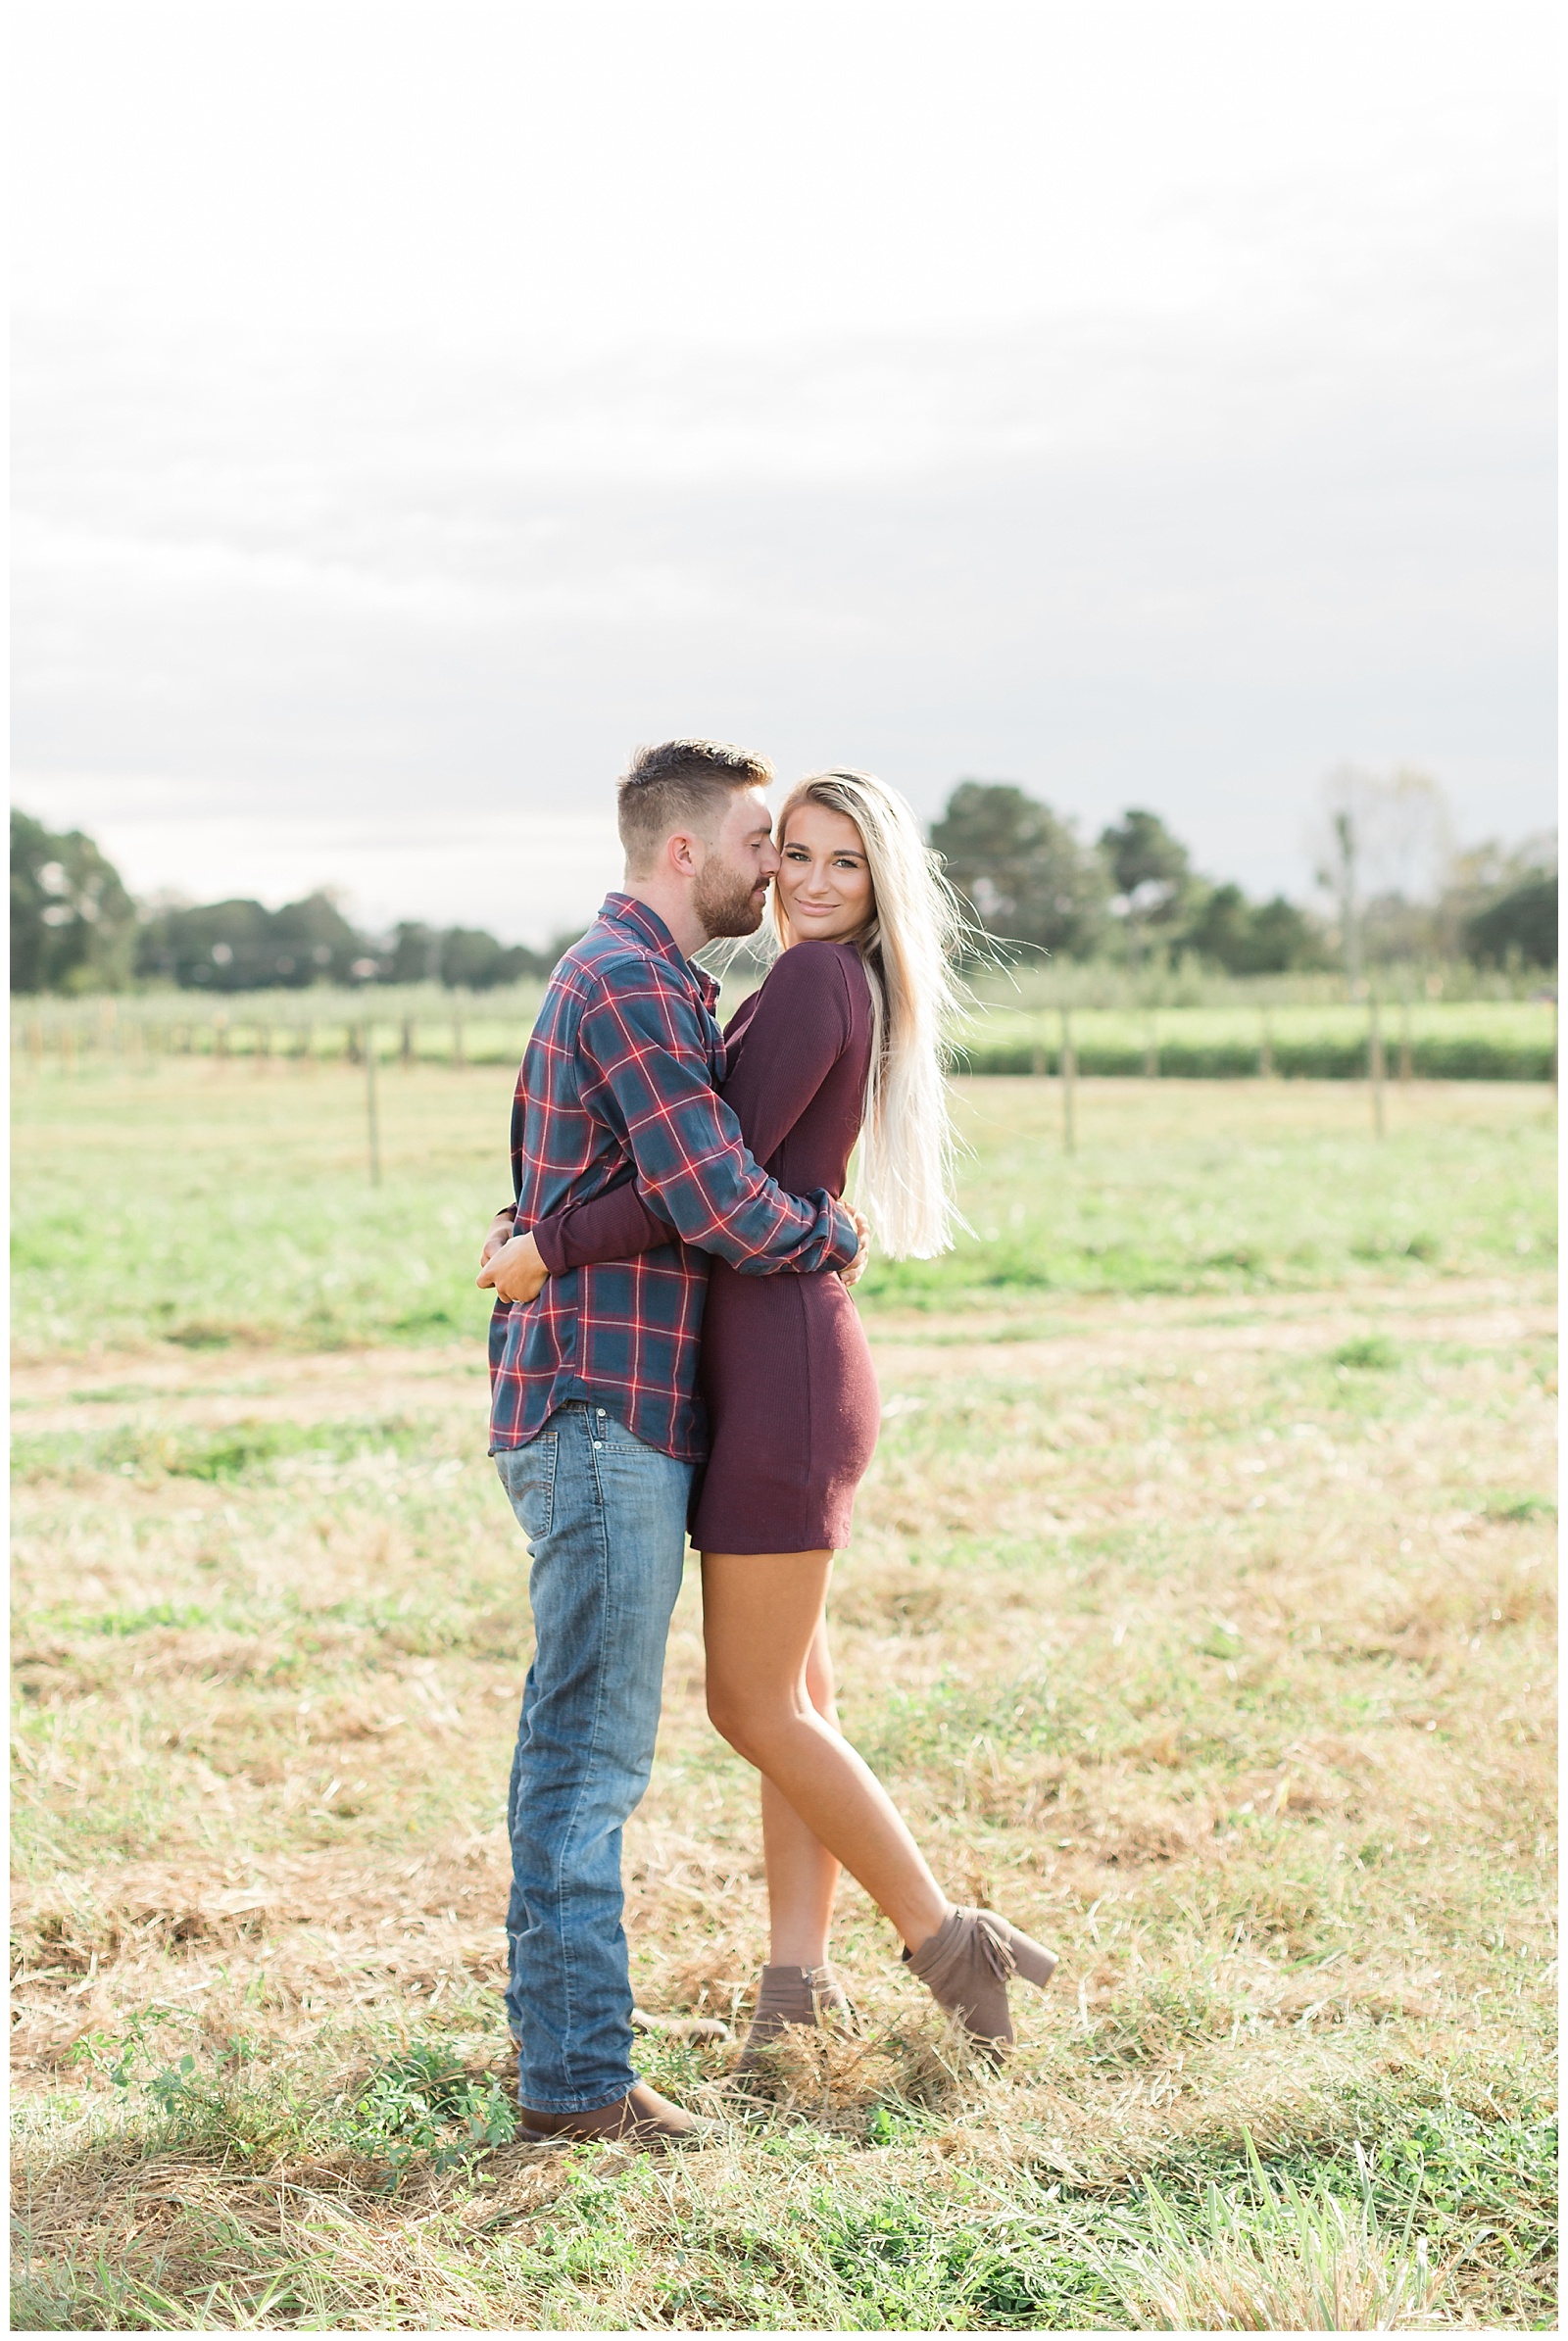 cullipher-farms-engagement-session-25.jpg